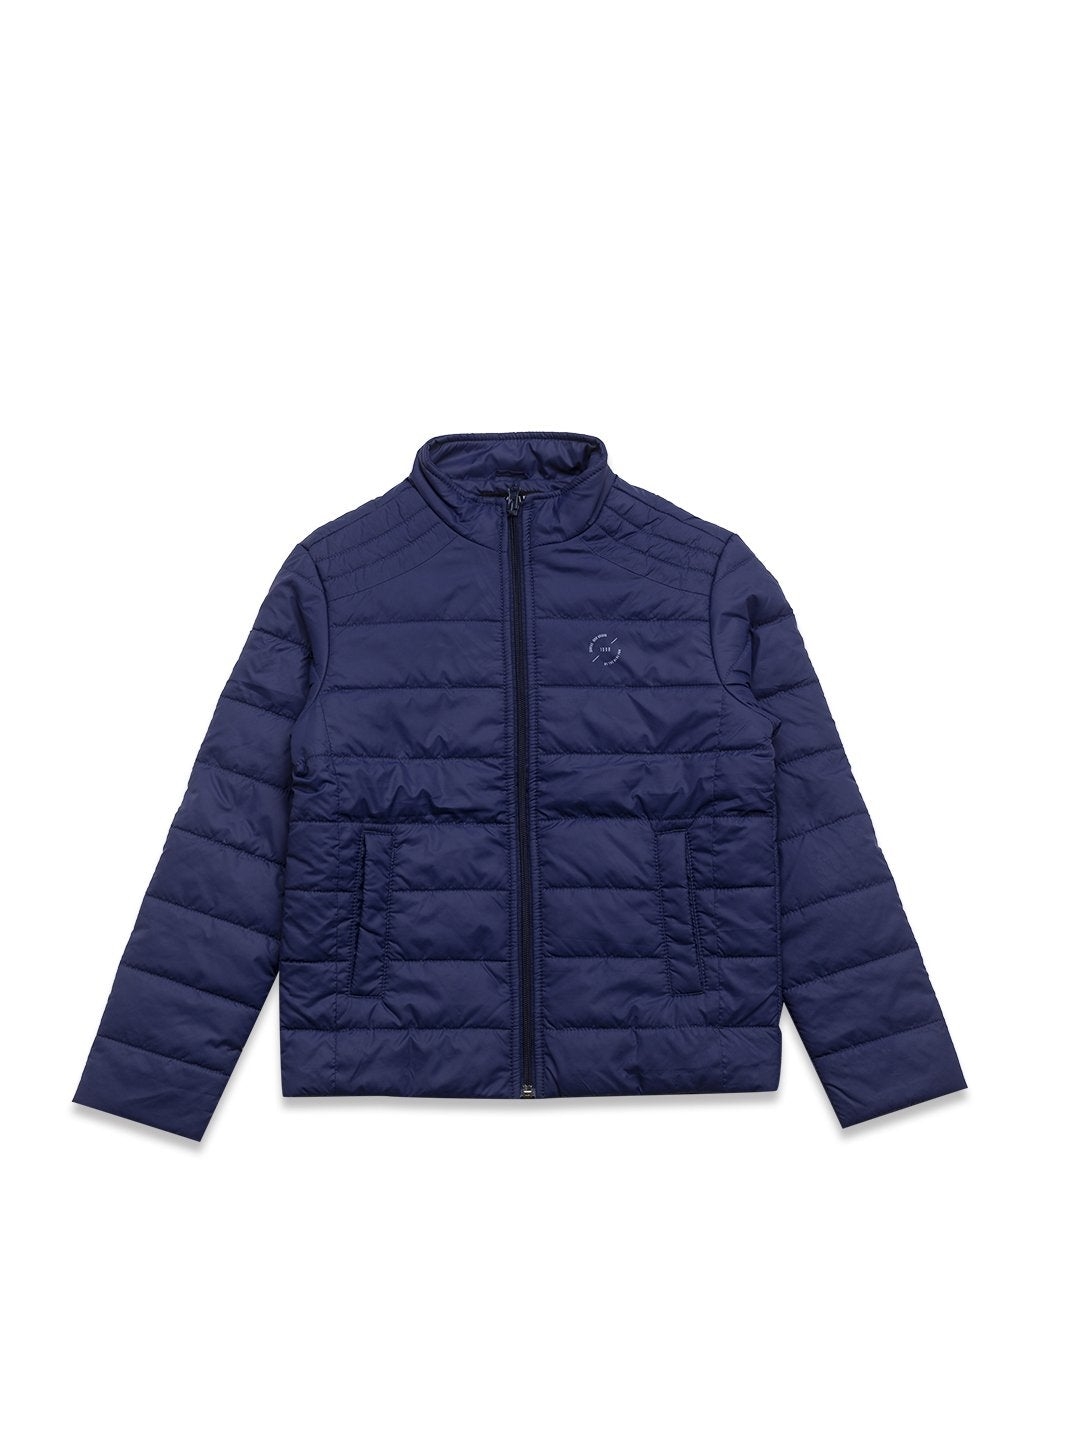 Status Quo | Navy Blue Quilted Kids Jacket